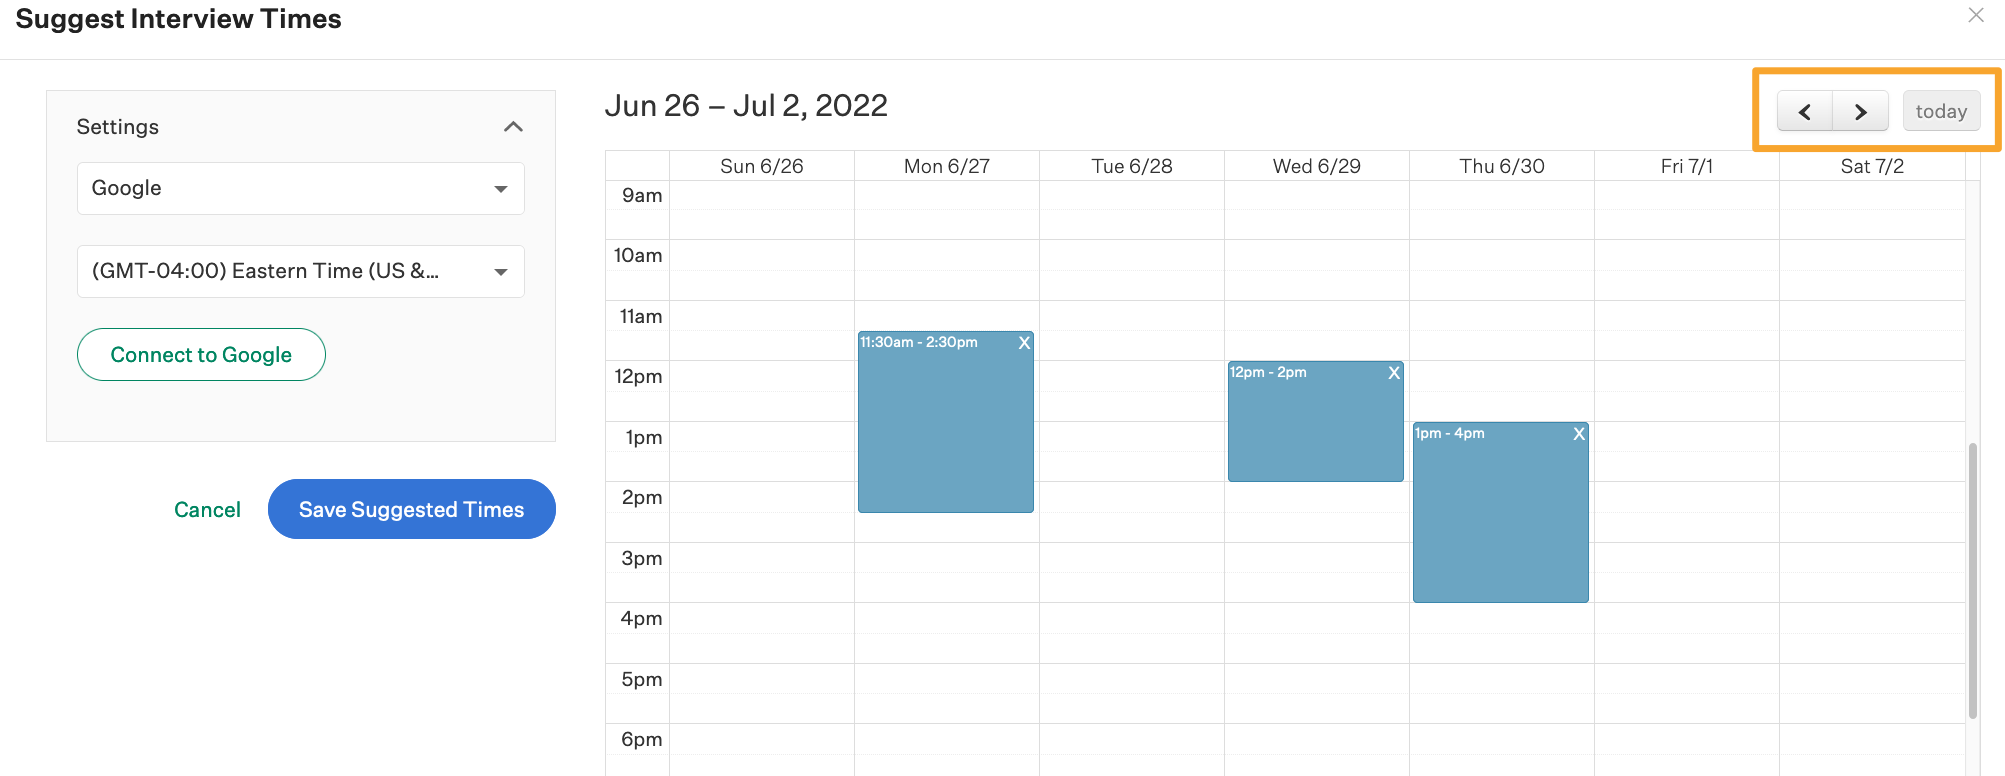 The interview suggestion times calendar shows the forward and backward arrows at the top-right of the calendar